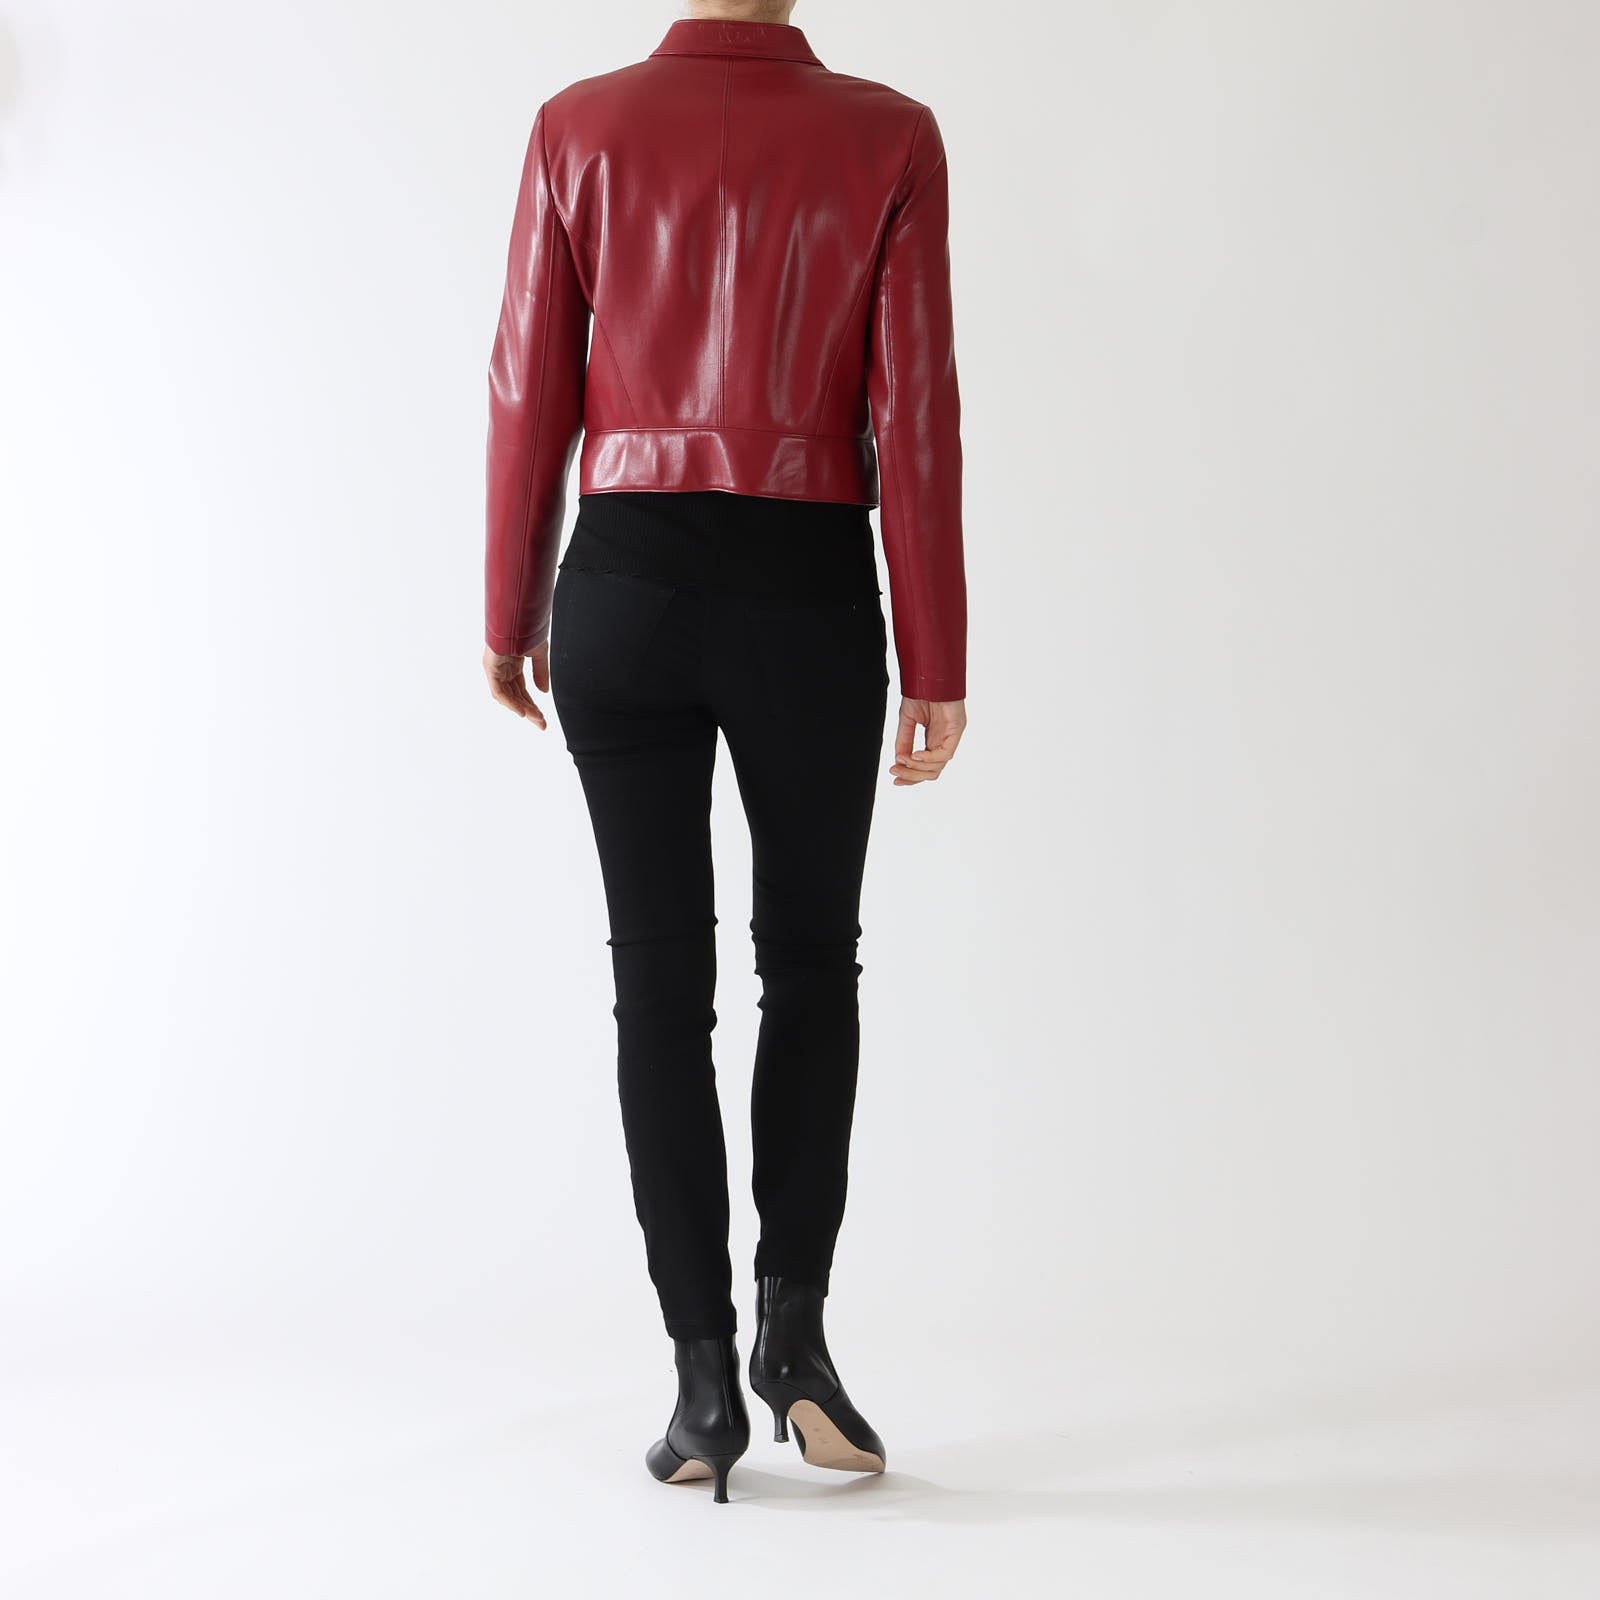 Martian Red Faux Leather Jacket